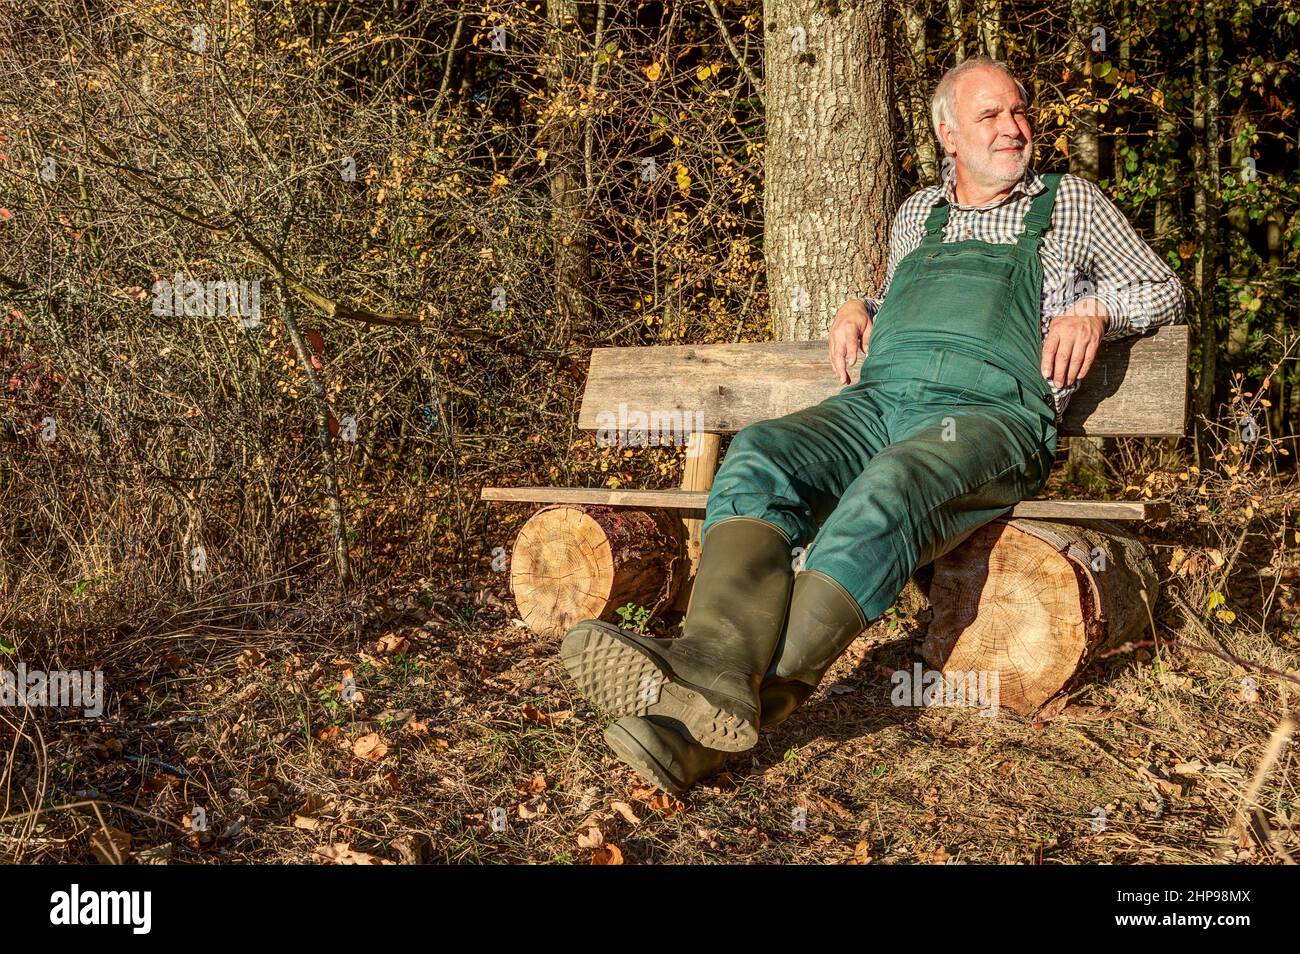 A farmer with green dungarees and rubber boots relaxes after work on his bench at the edge of the forest in the mild evening sun. Stock Photo